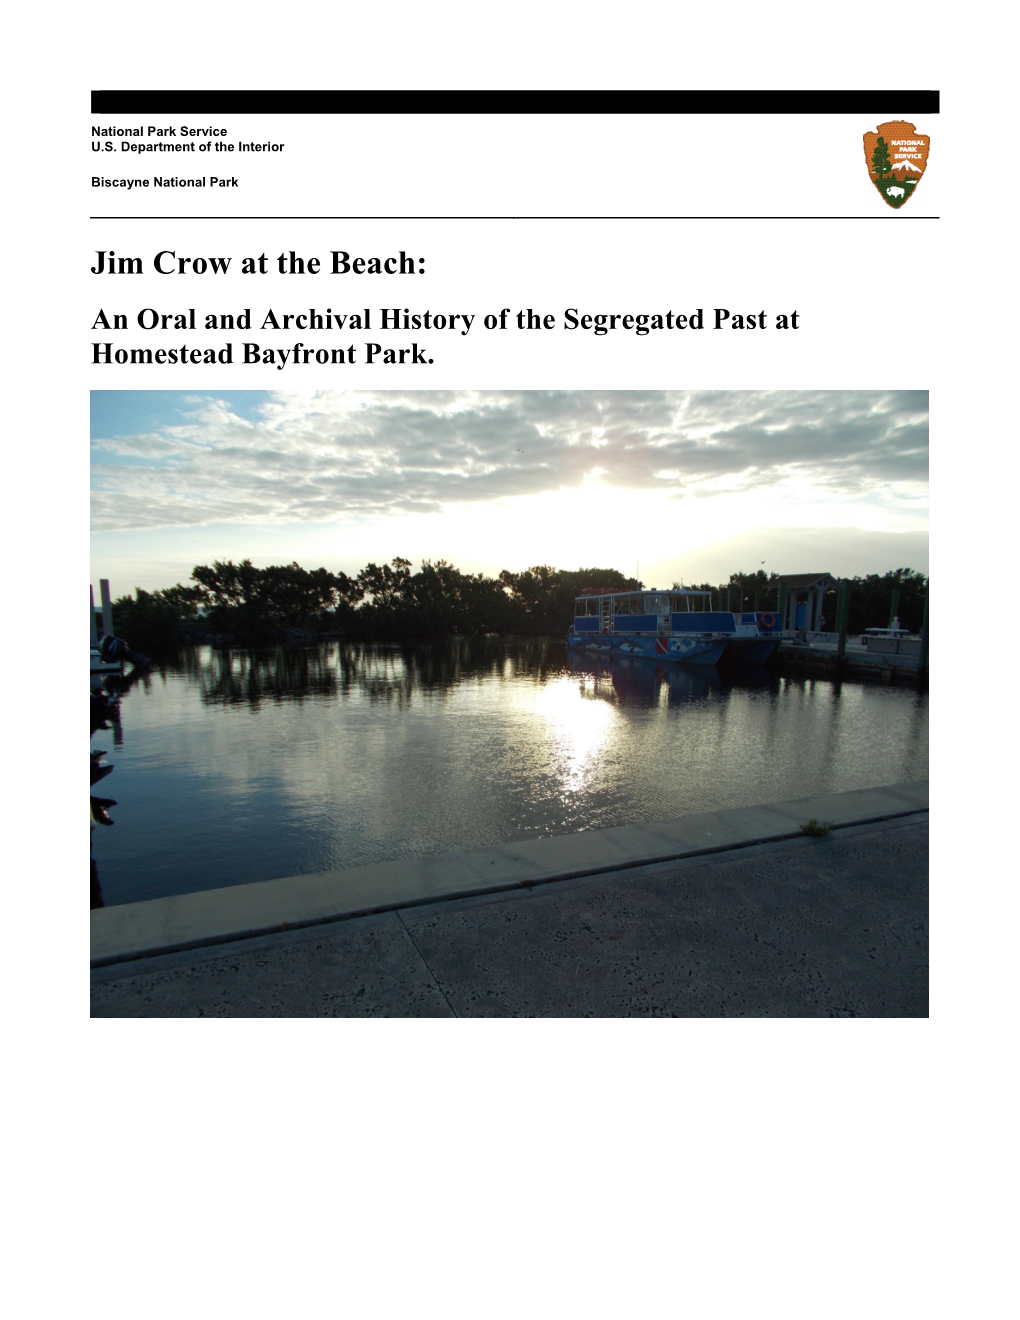 Jim Crow at the Beach: an Oral and Archival History of the Segregated Past at Homestead Bayfront Park